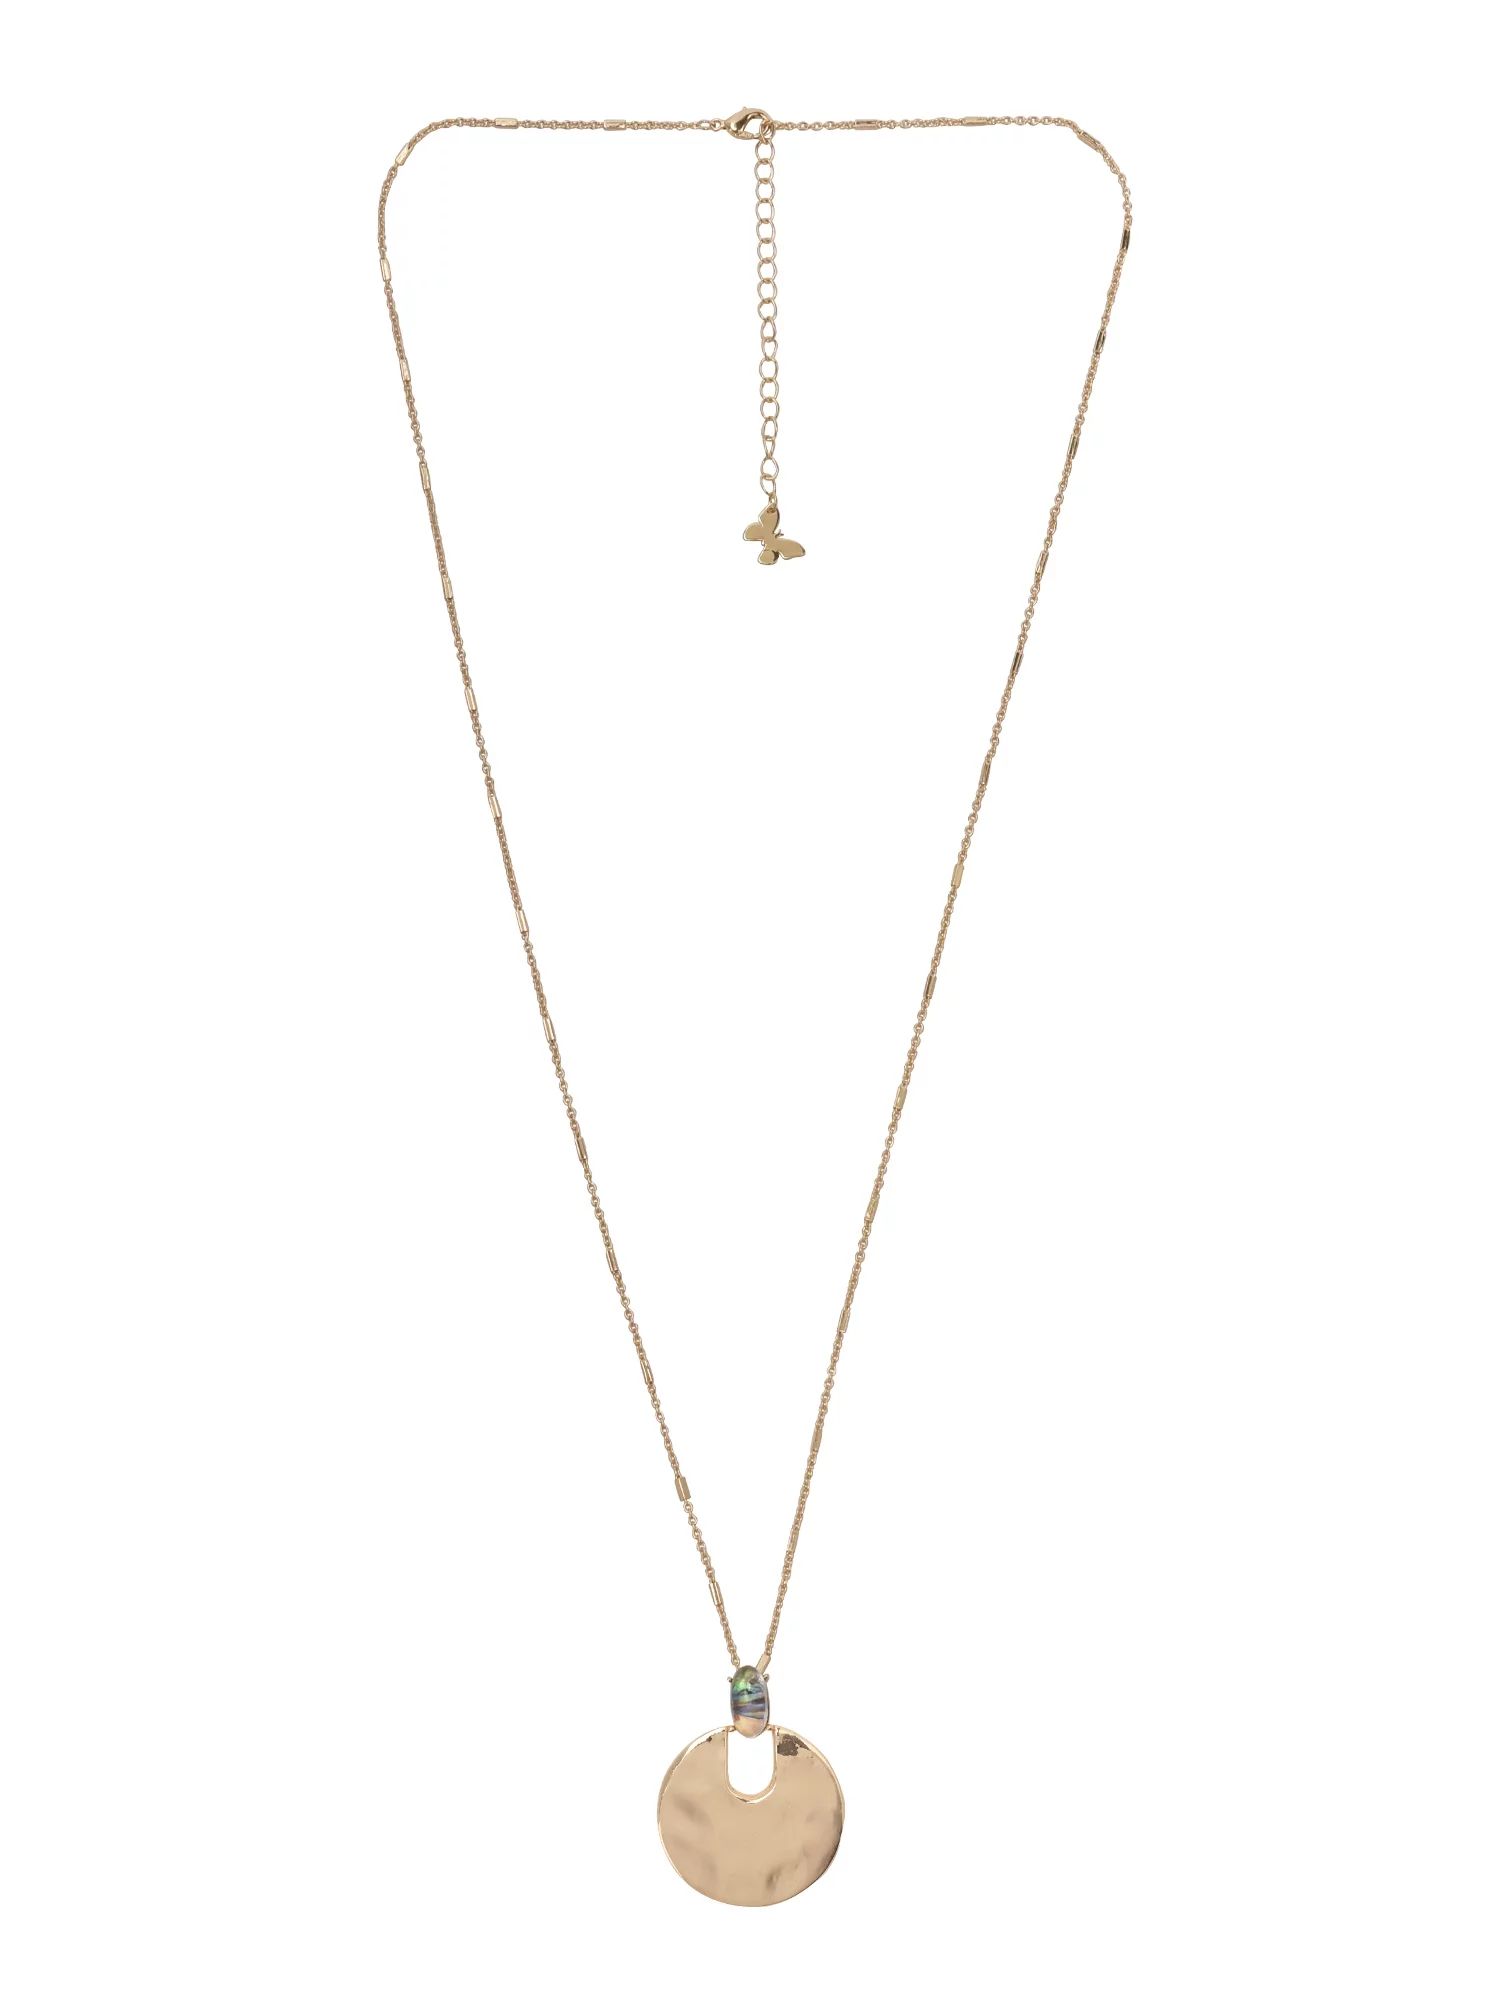 The Pioneer Woman - Women's Jewelry, Shiny Gold-tone Hammered Pendant Necklace | Walmart (US)